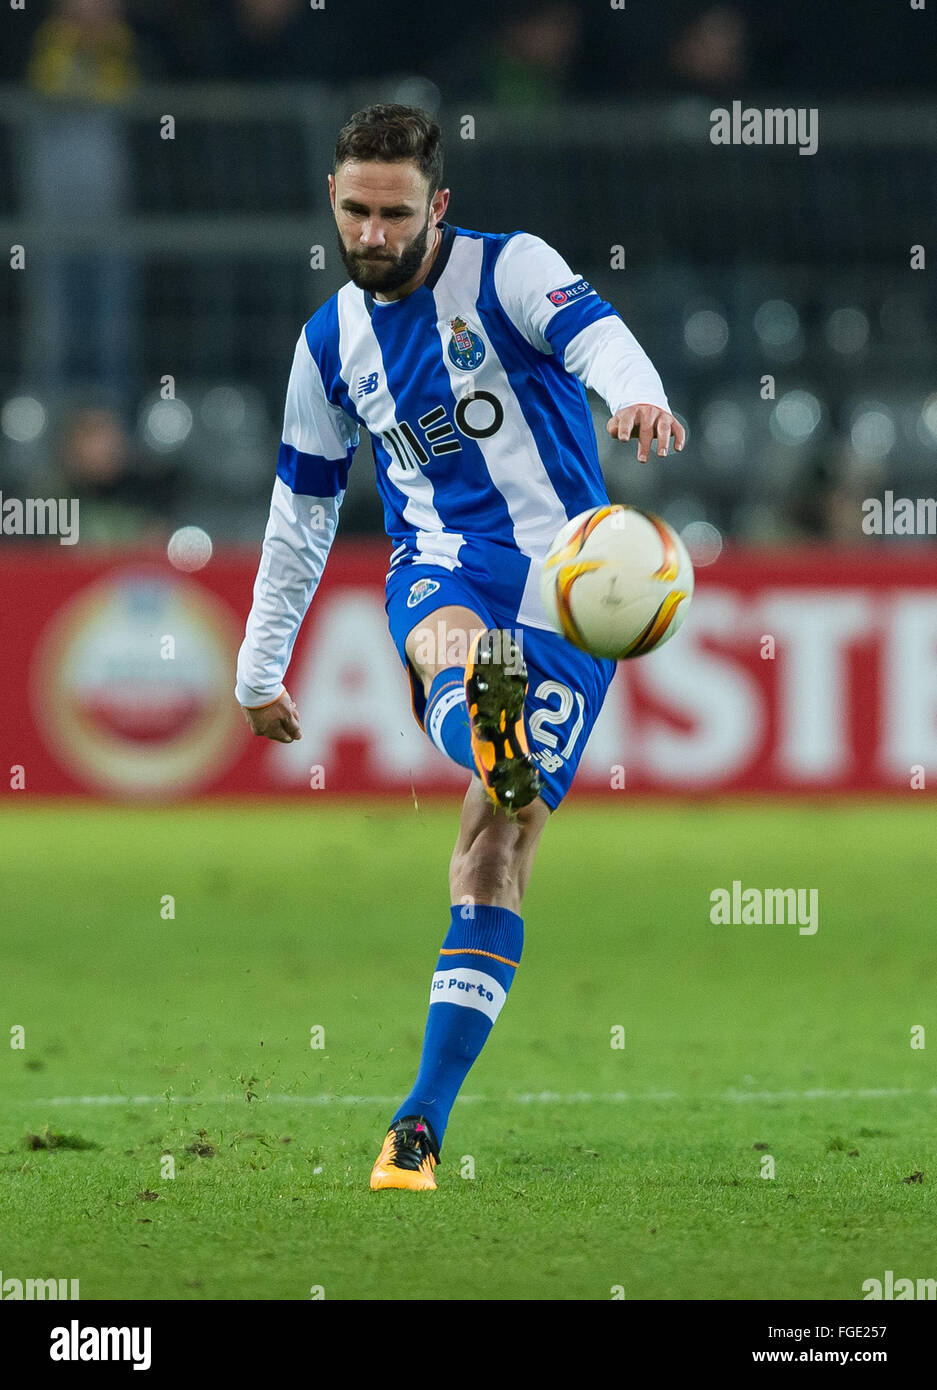 Dortmund, Germany. 18th Feb, 2016. Porto's Miguel Layun in action during the UEFA Europa League between Borussia Dortmund and FC Porto at Signal Iduna Park in Dortmund, Germany, 18 February 2016. Photo: Guido Kirchner/dpa/Alamy Live News Stock Photo